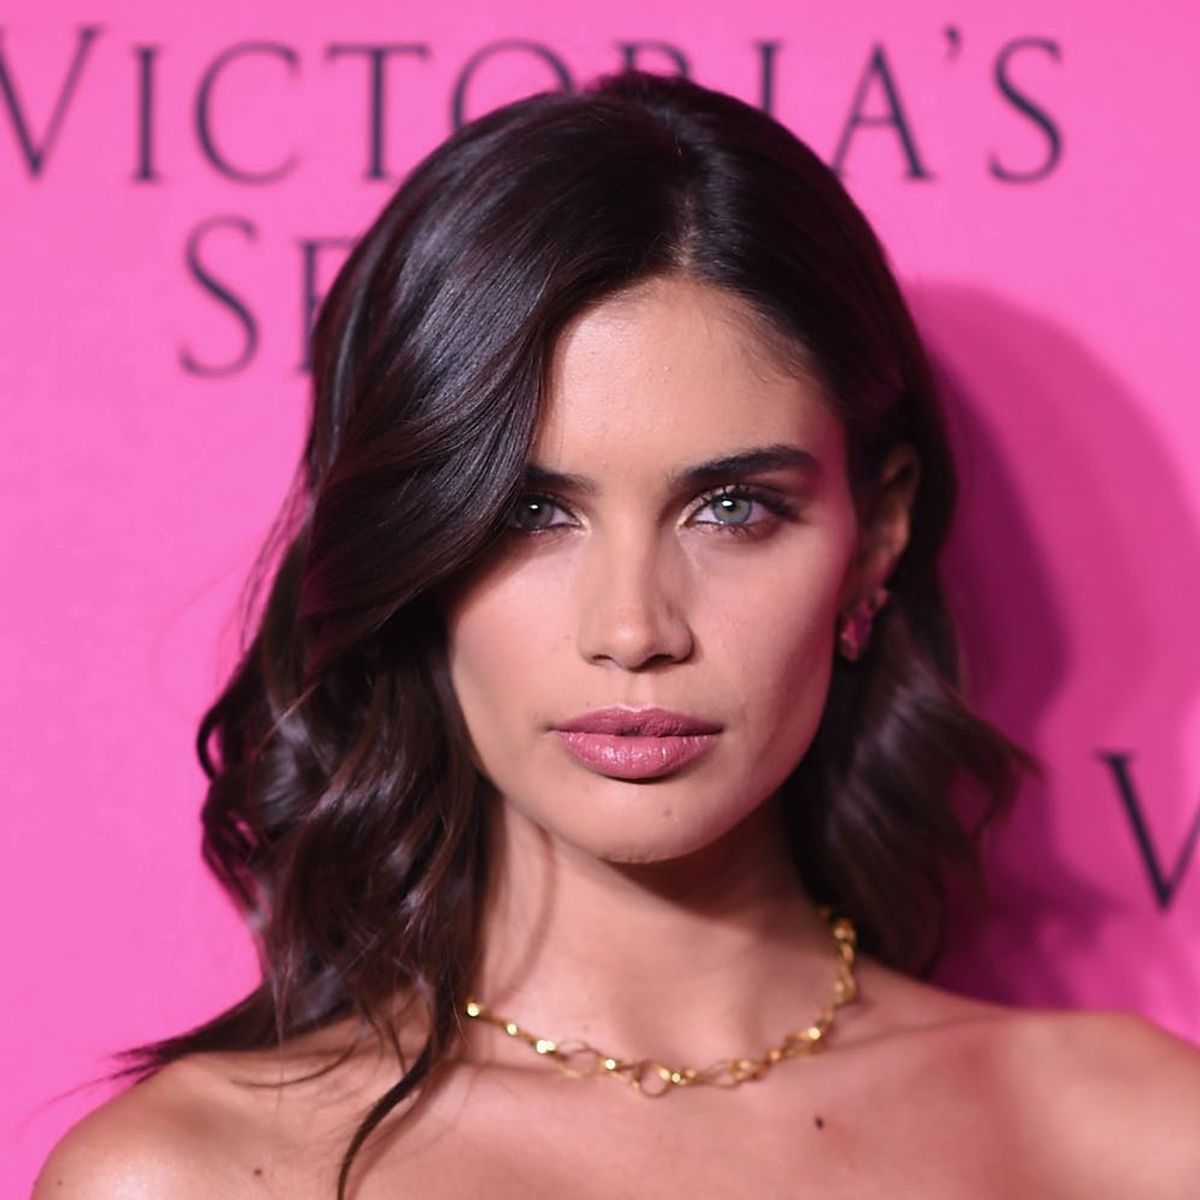 This Victoria’s Secret Model Just Wore a Bikini Upside Down and We’re So Confused